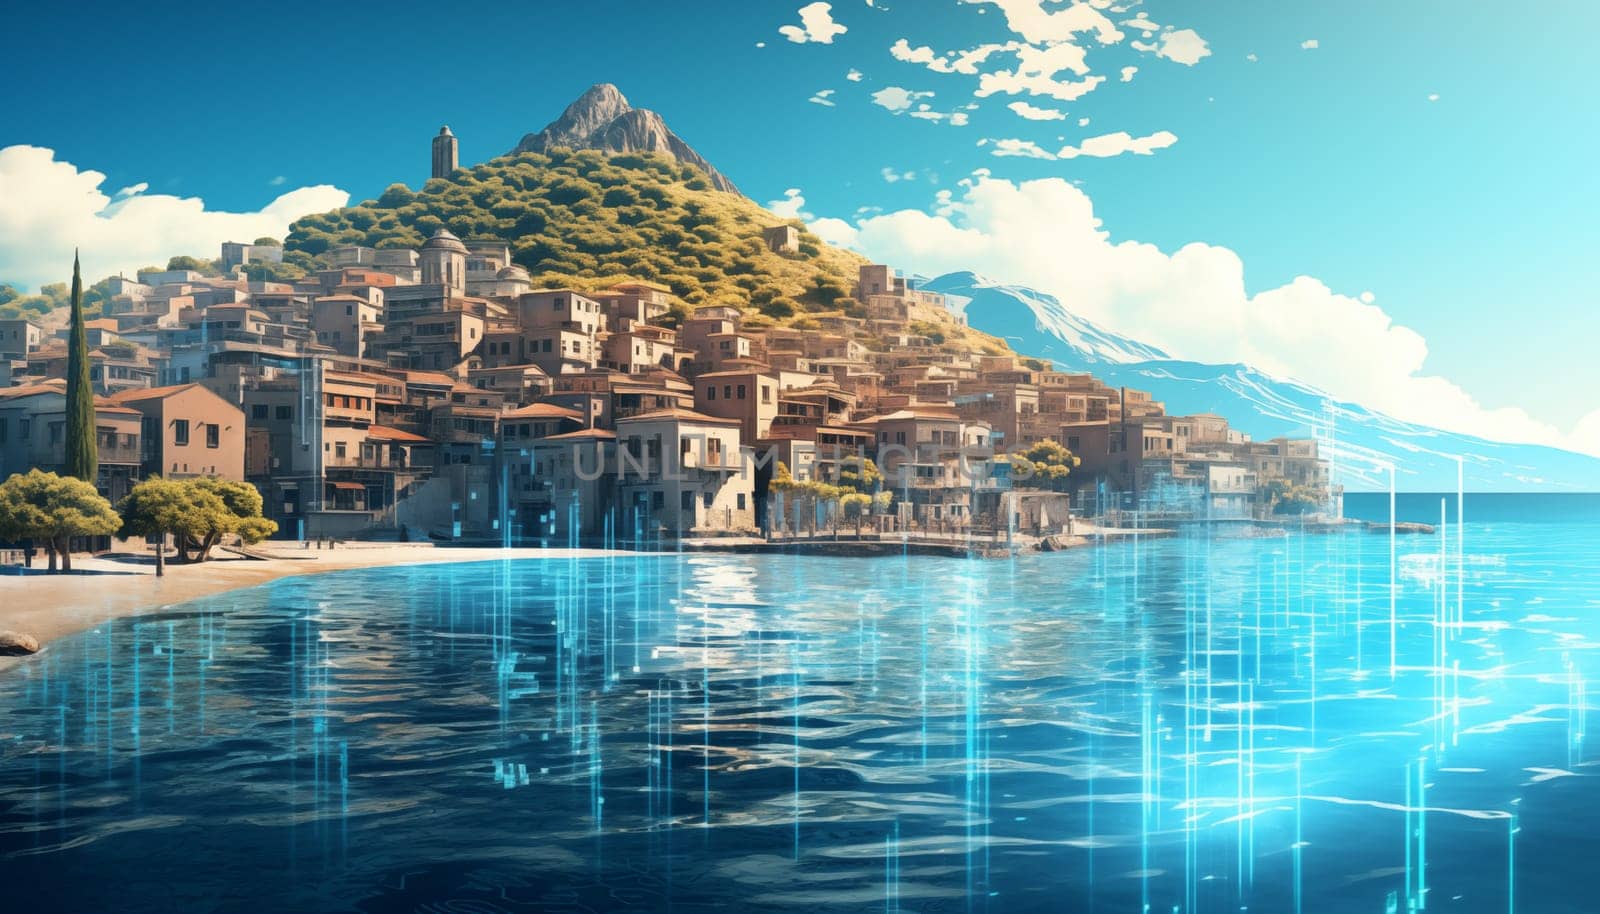 Metropolis Magic: A Digital Oasis Where City and Beach Collide by Nadtochiy